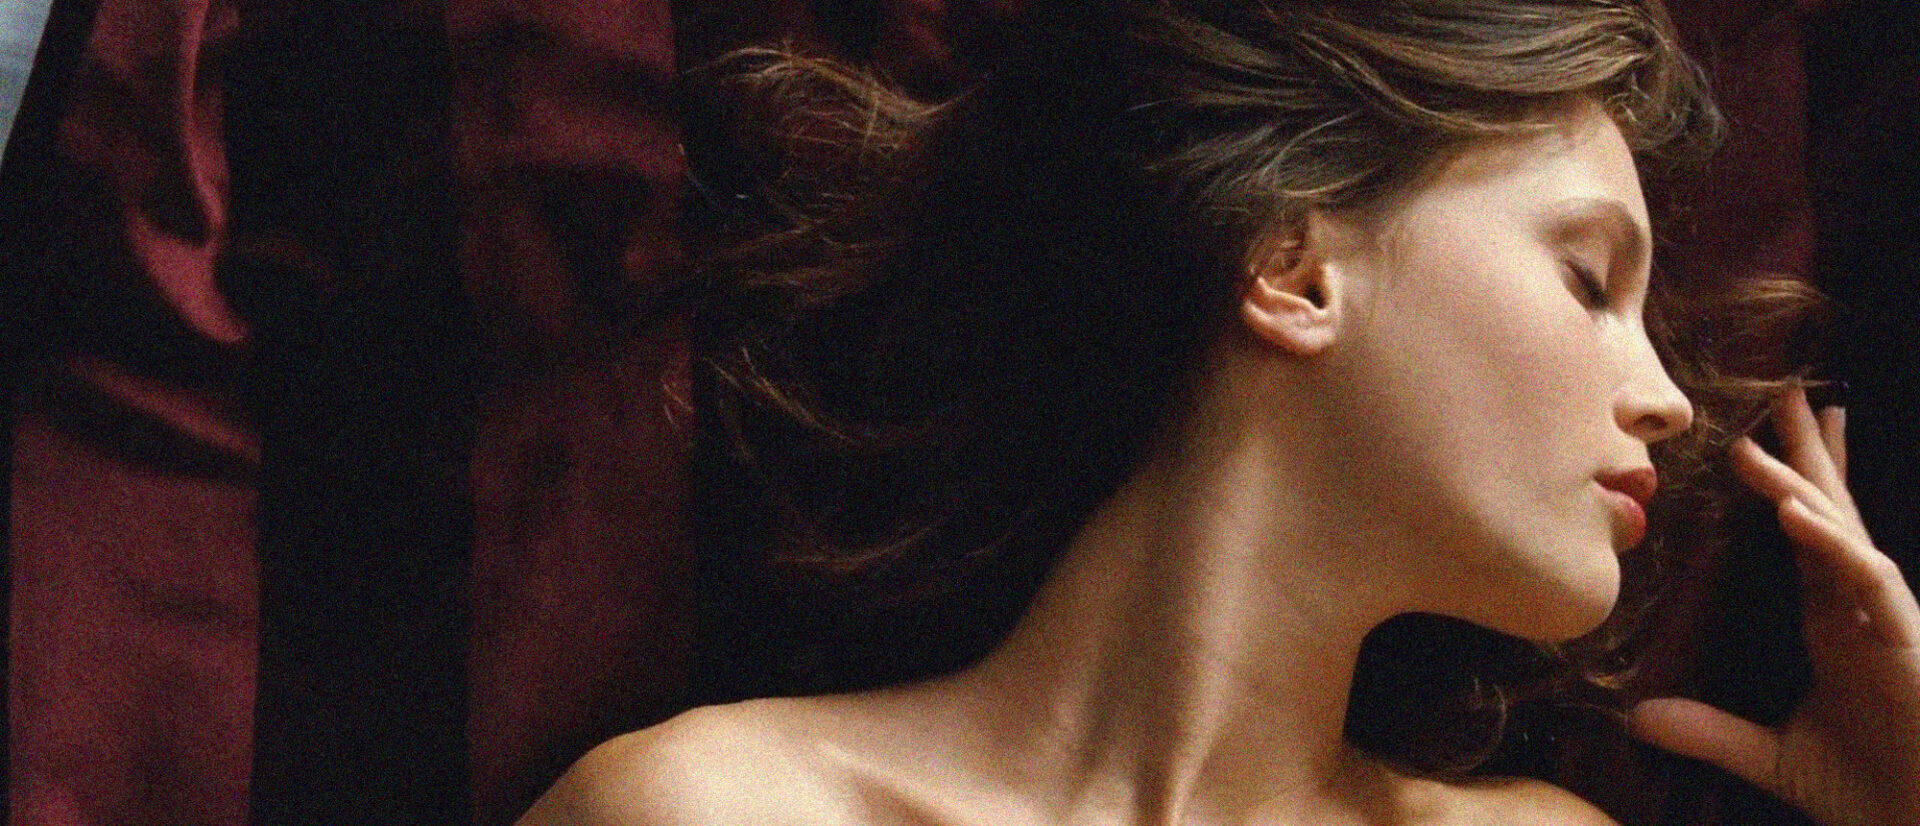 Review phim 'Young And Beautiful’ của François Ozon